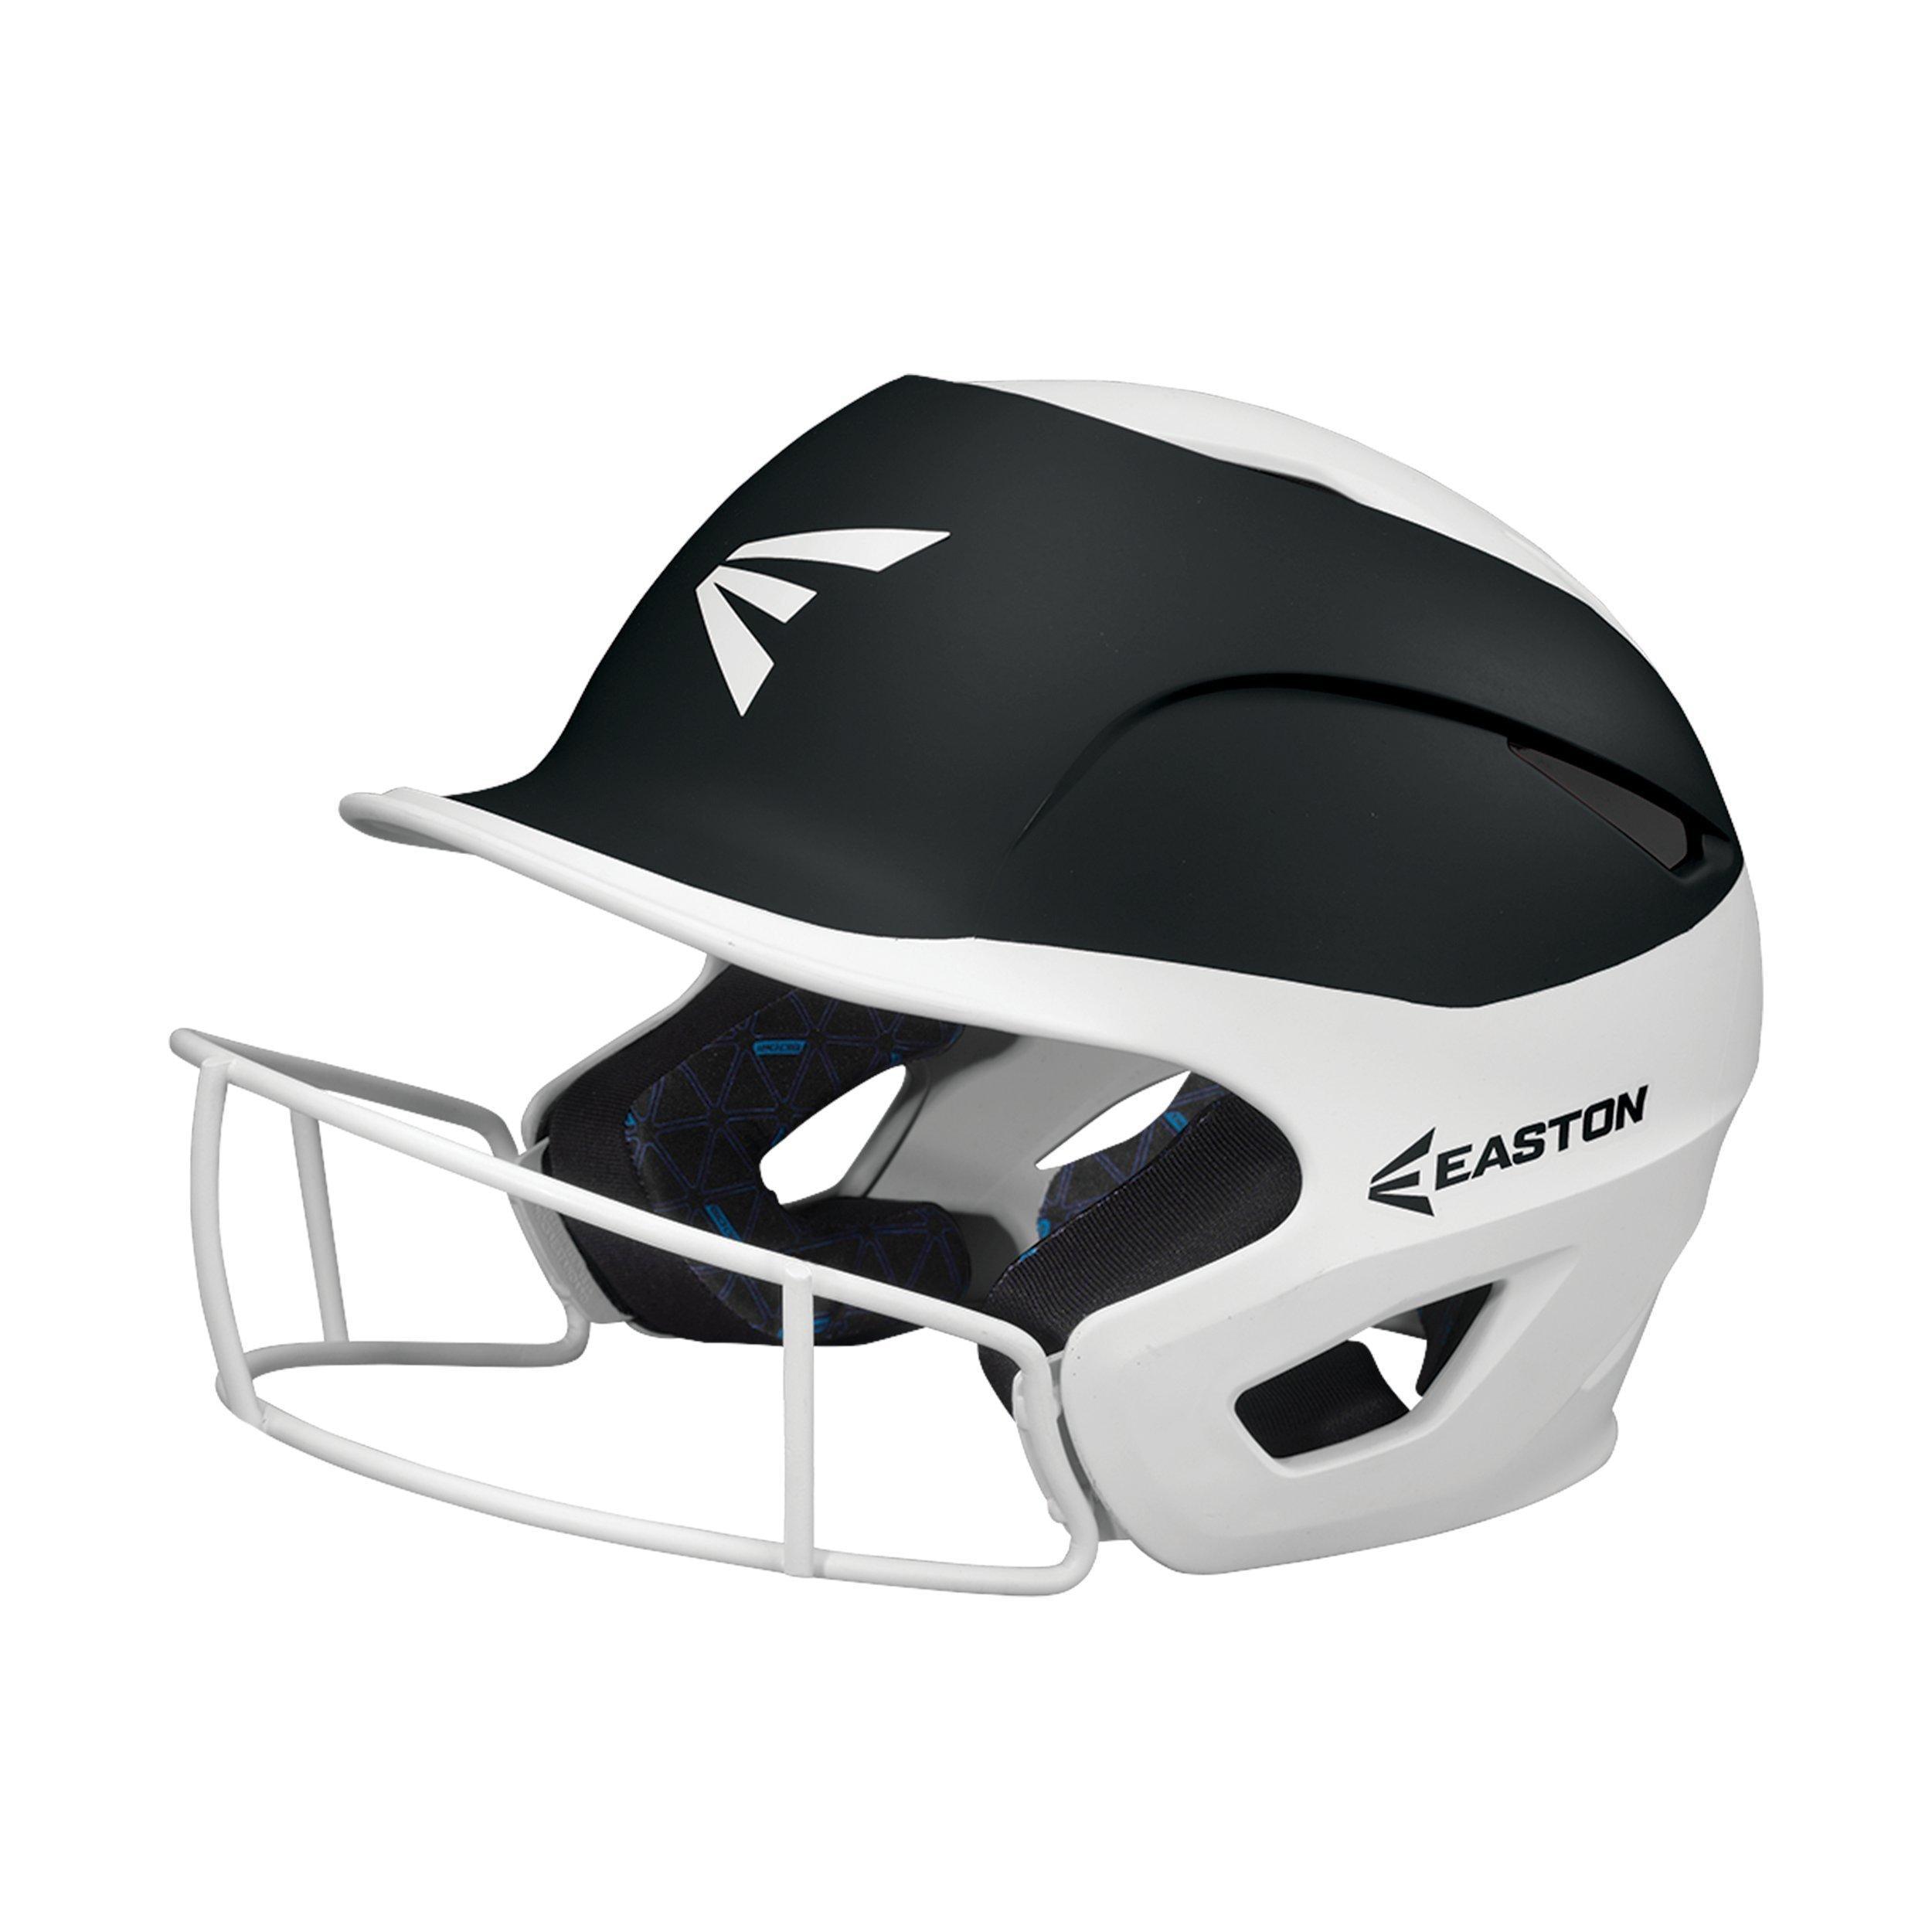 Easton Prowess Grip Two Tone Fastpitch Softball Helmet with Mask - Smash It Sports